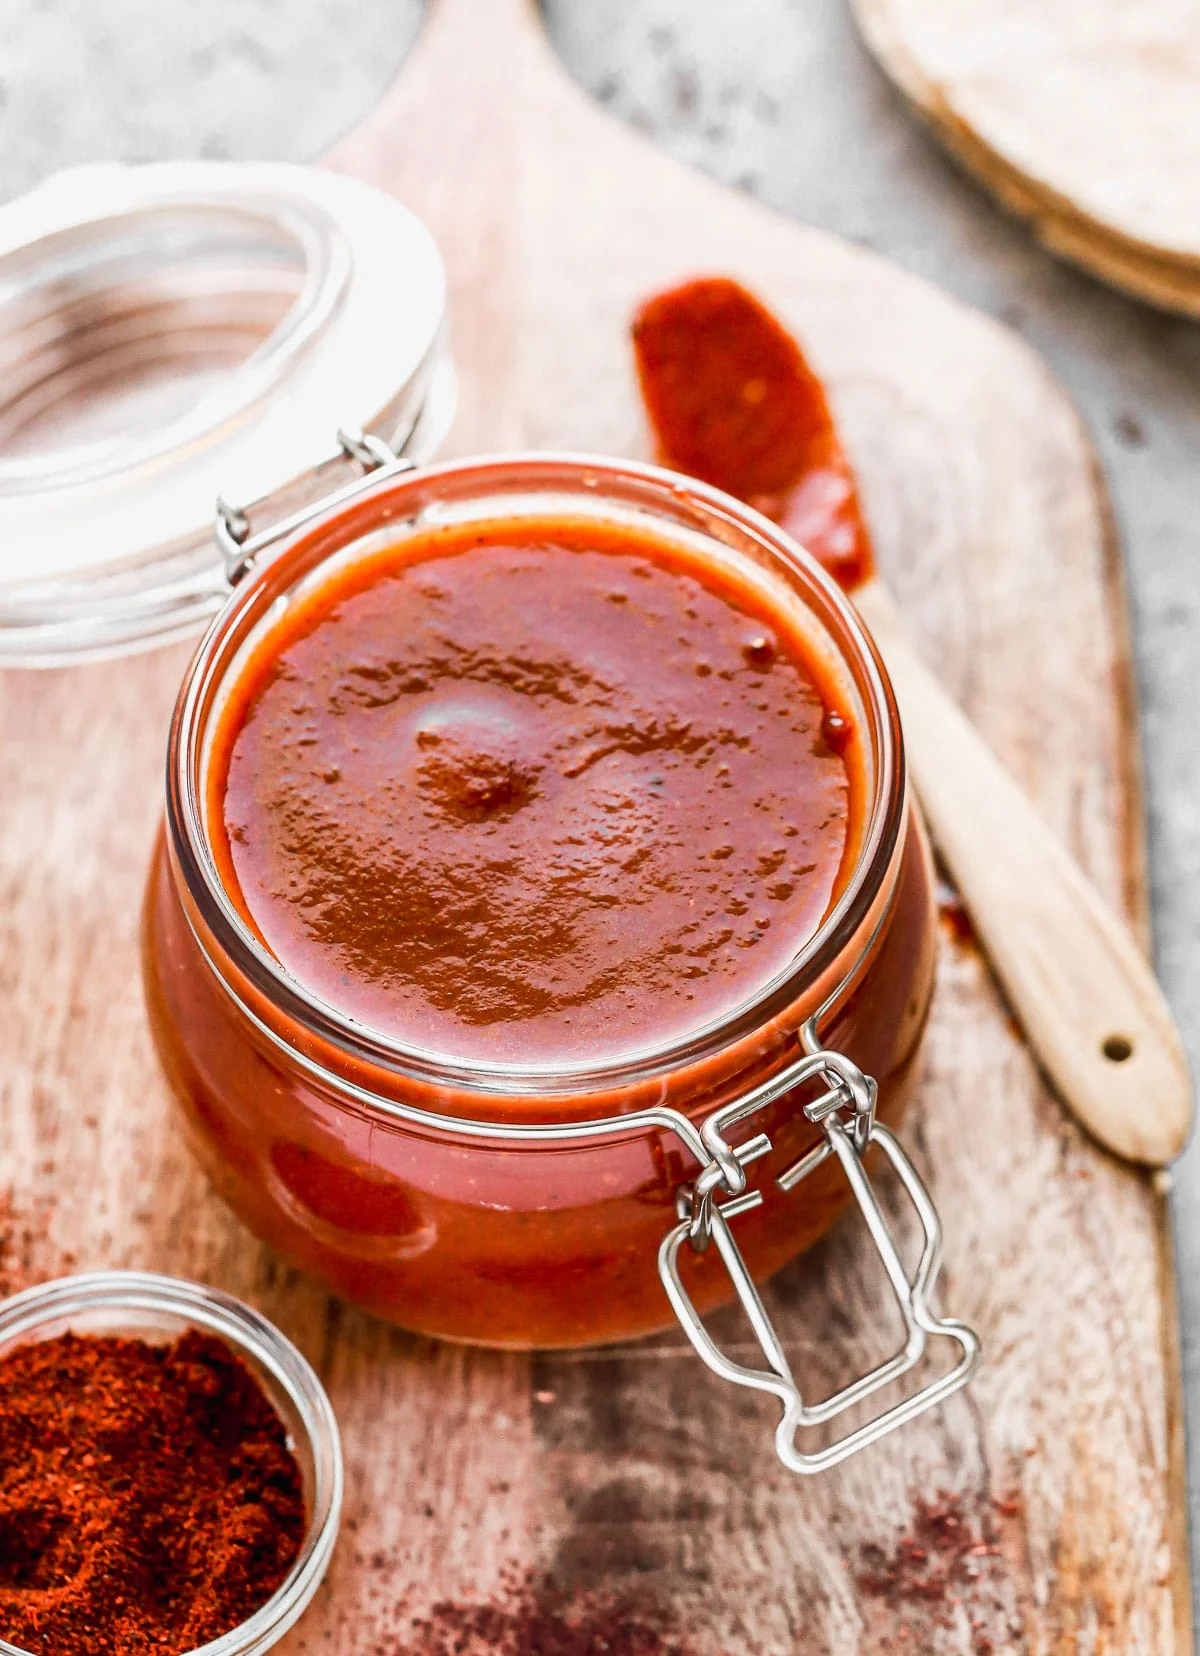 With just a few staple pantry ingredients and 15 minutes of your time, you can whip up an Enchilada Sauce Recipe infinitely better than anything you'll find at the grocery store. Our version is tangy, smoky, and slightly sweet with just a touch of heat. Perfect on enchiladas, tacos, or quick tex-mex inspired pastas.